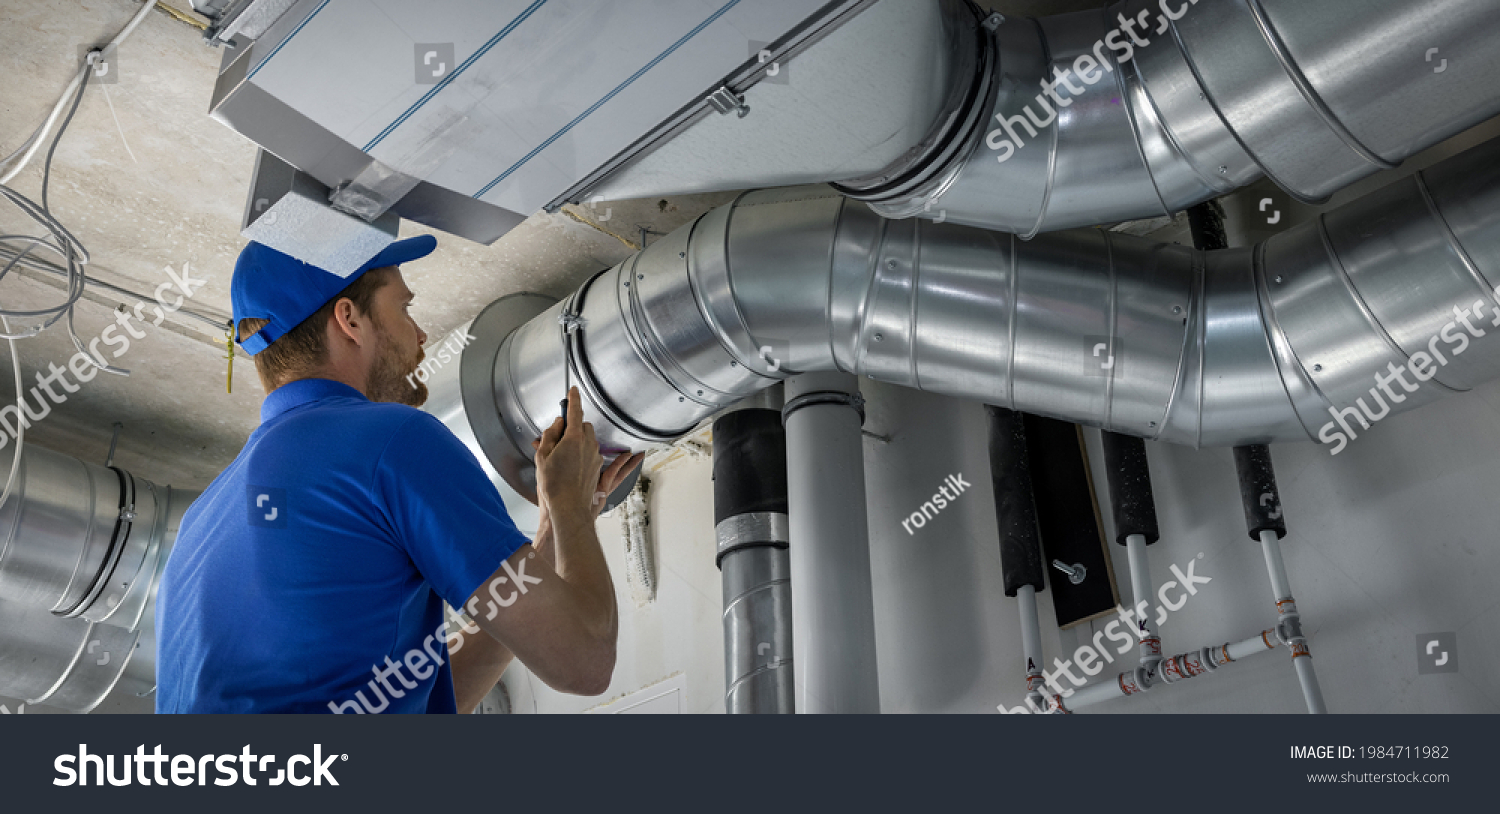 hvac worker install ducted pipe system for ventilation and air conditioning. copy space #1984711982